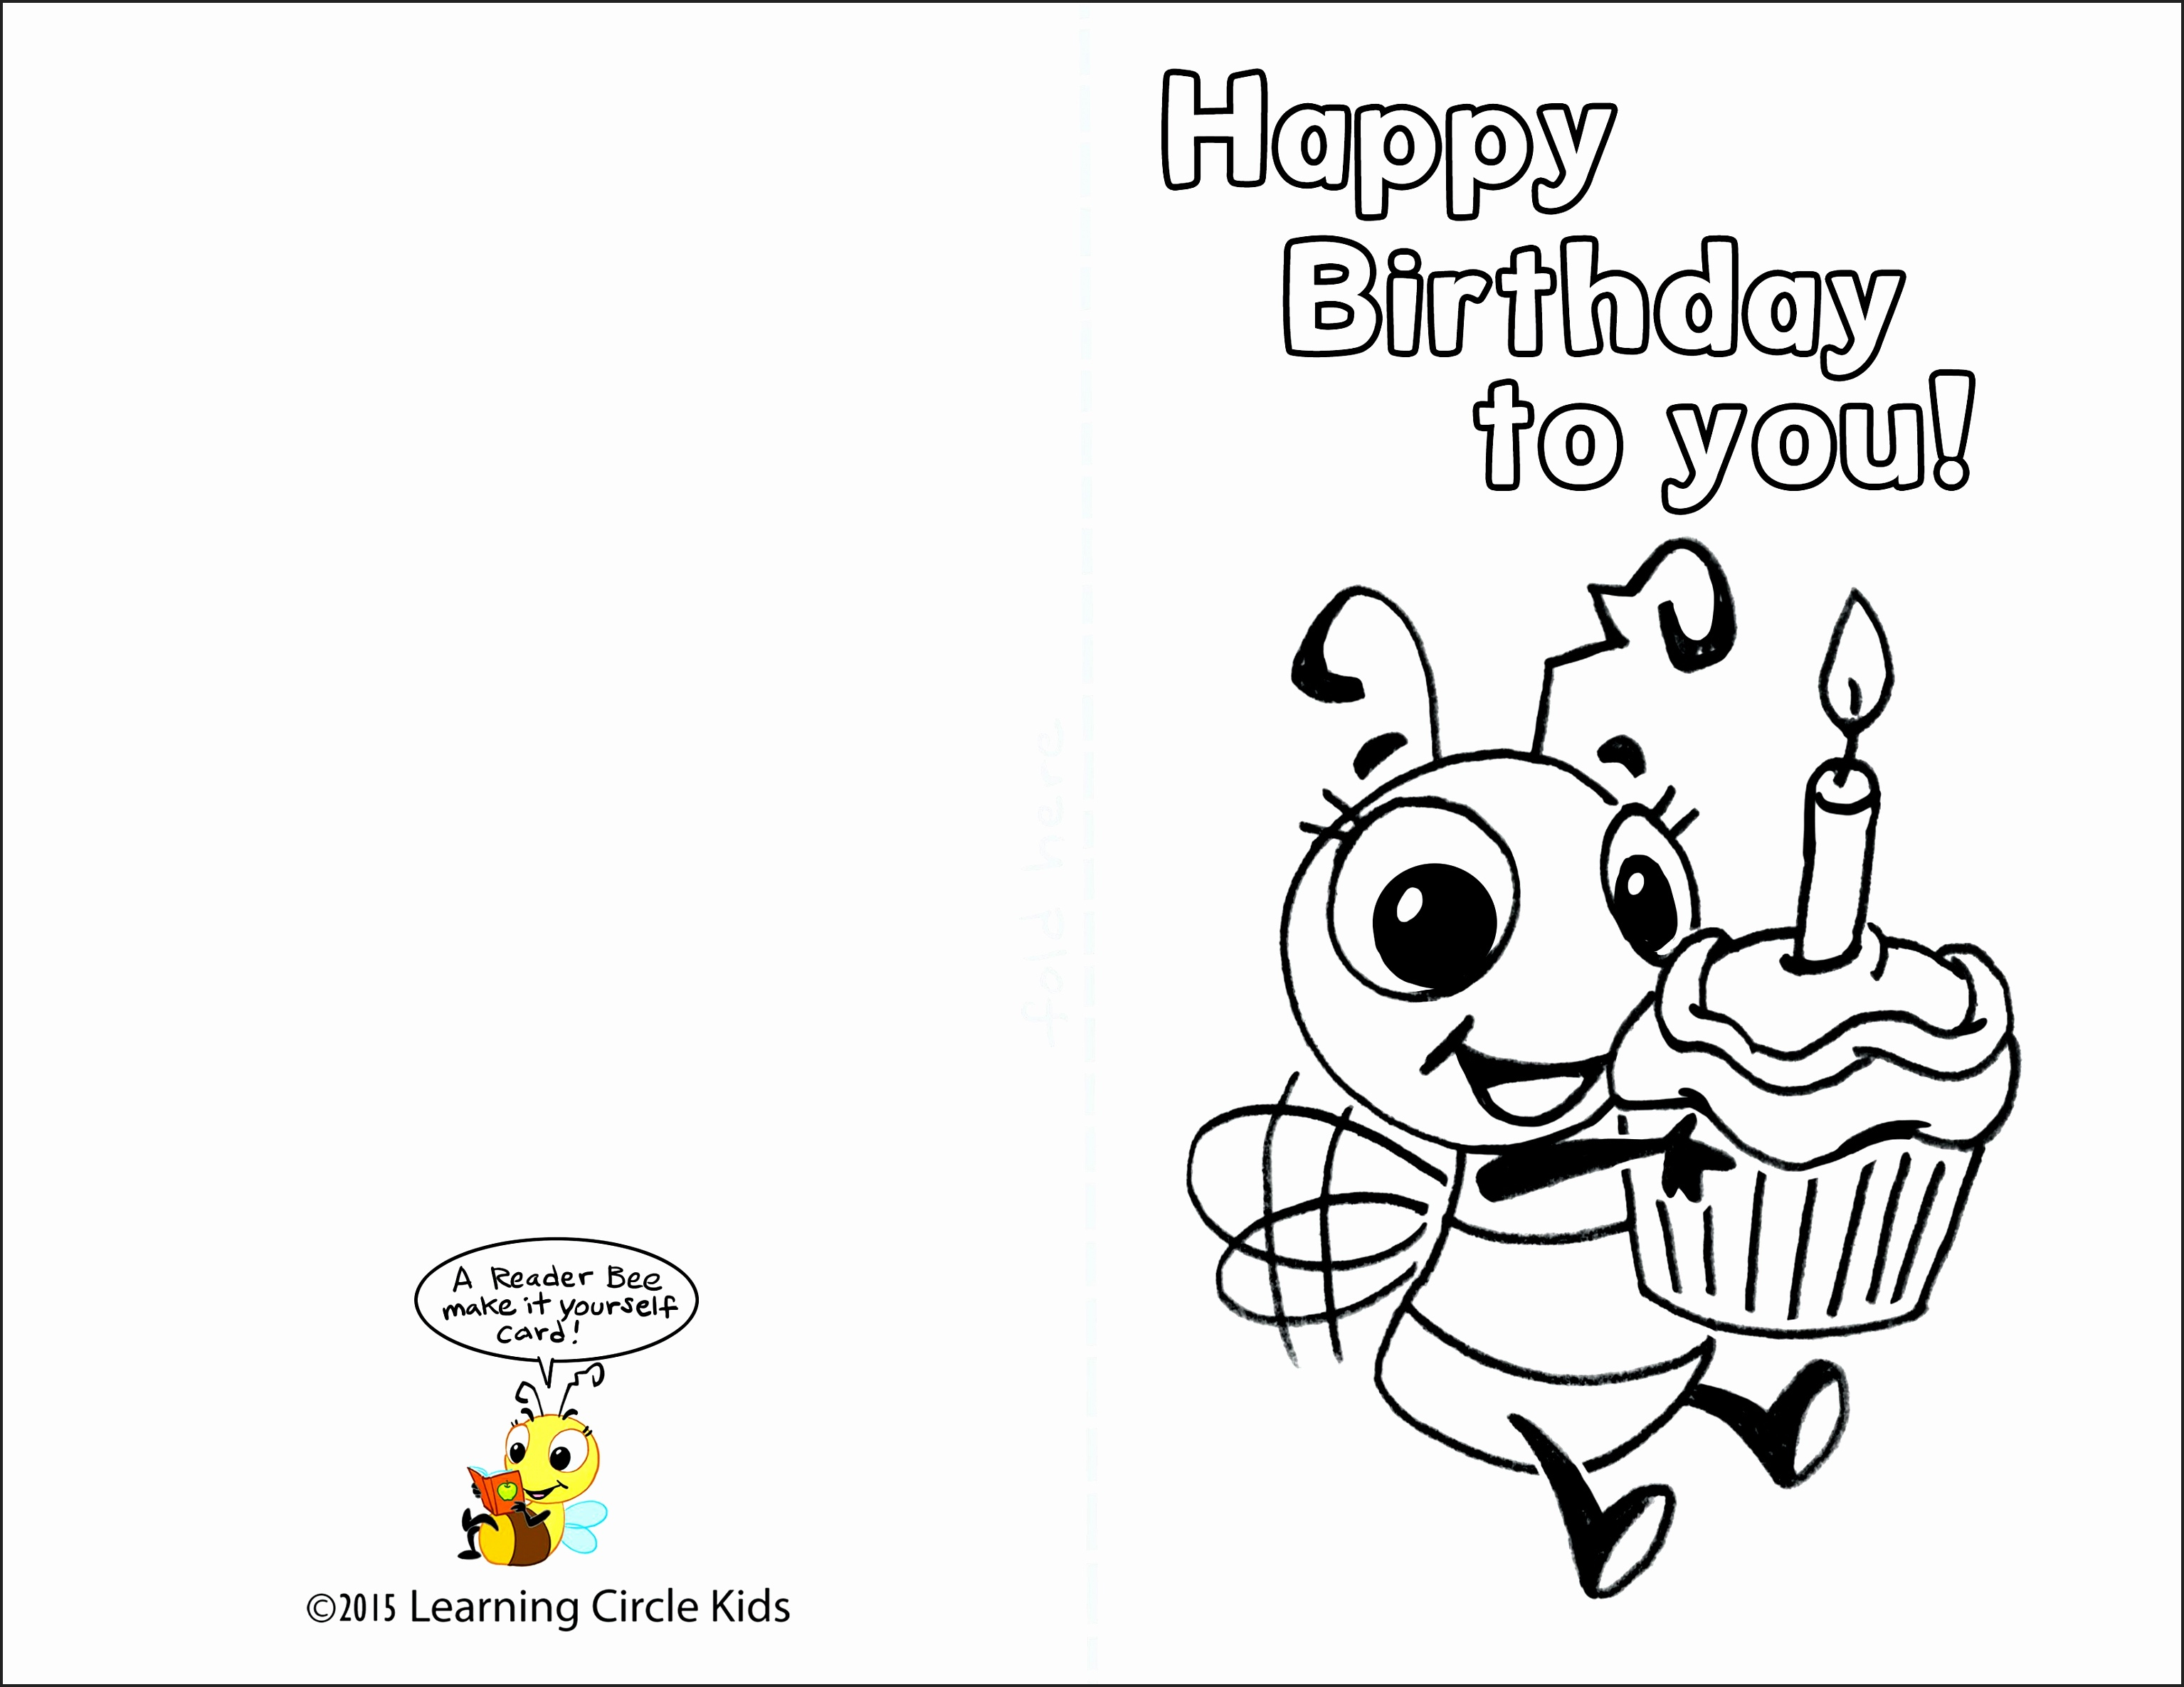 Free Printable Birthday Cards To Color - Printable Cards - Free Printable Greeting Cards